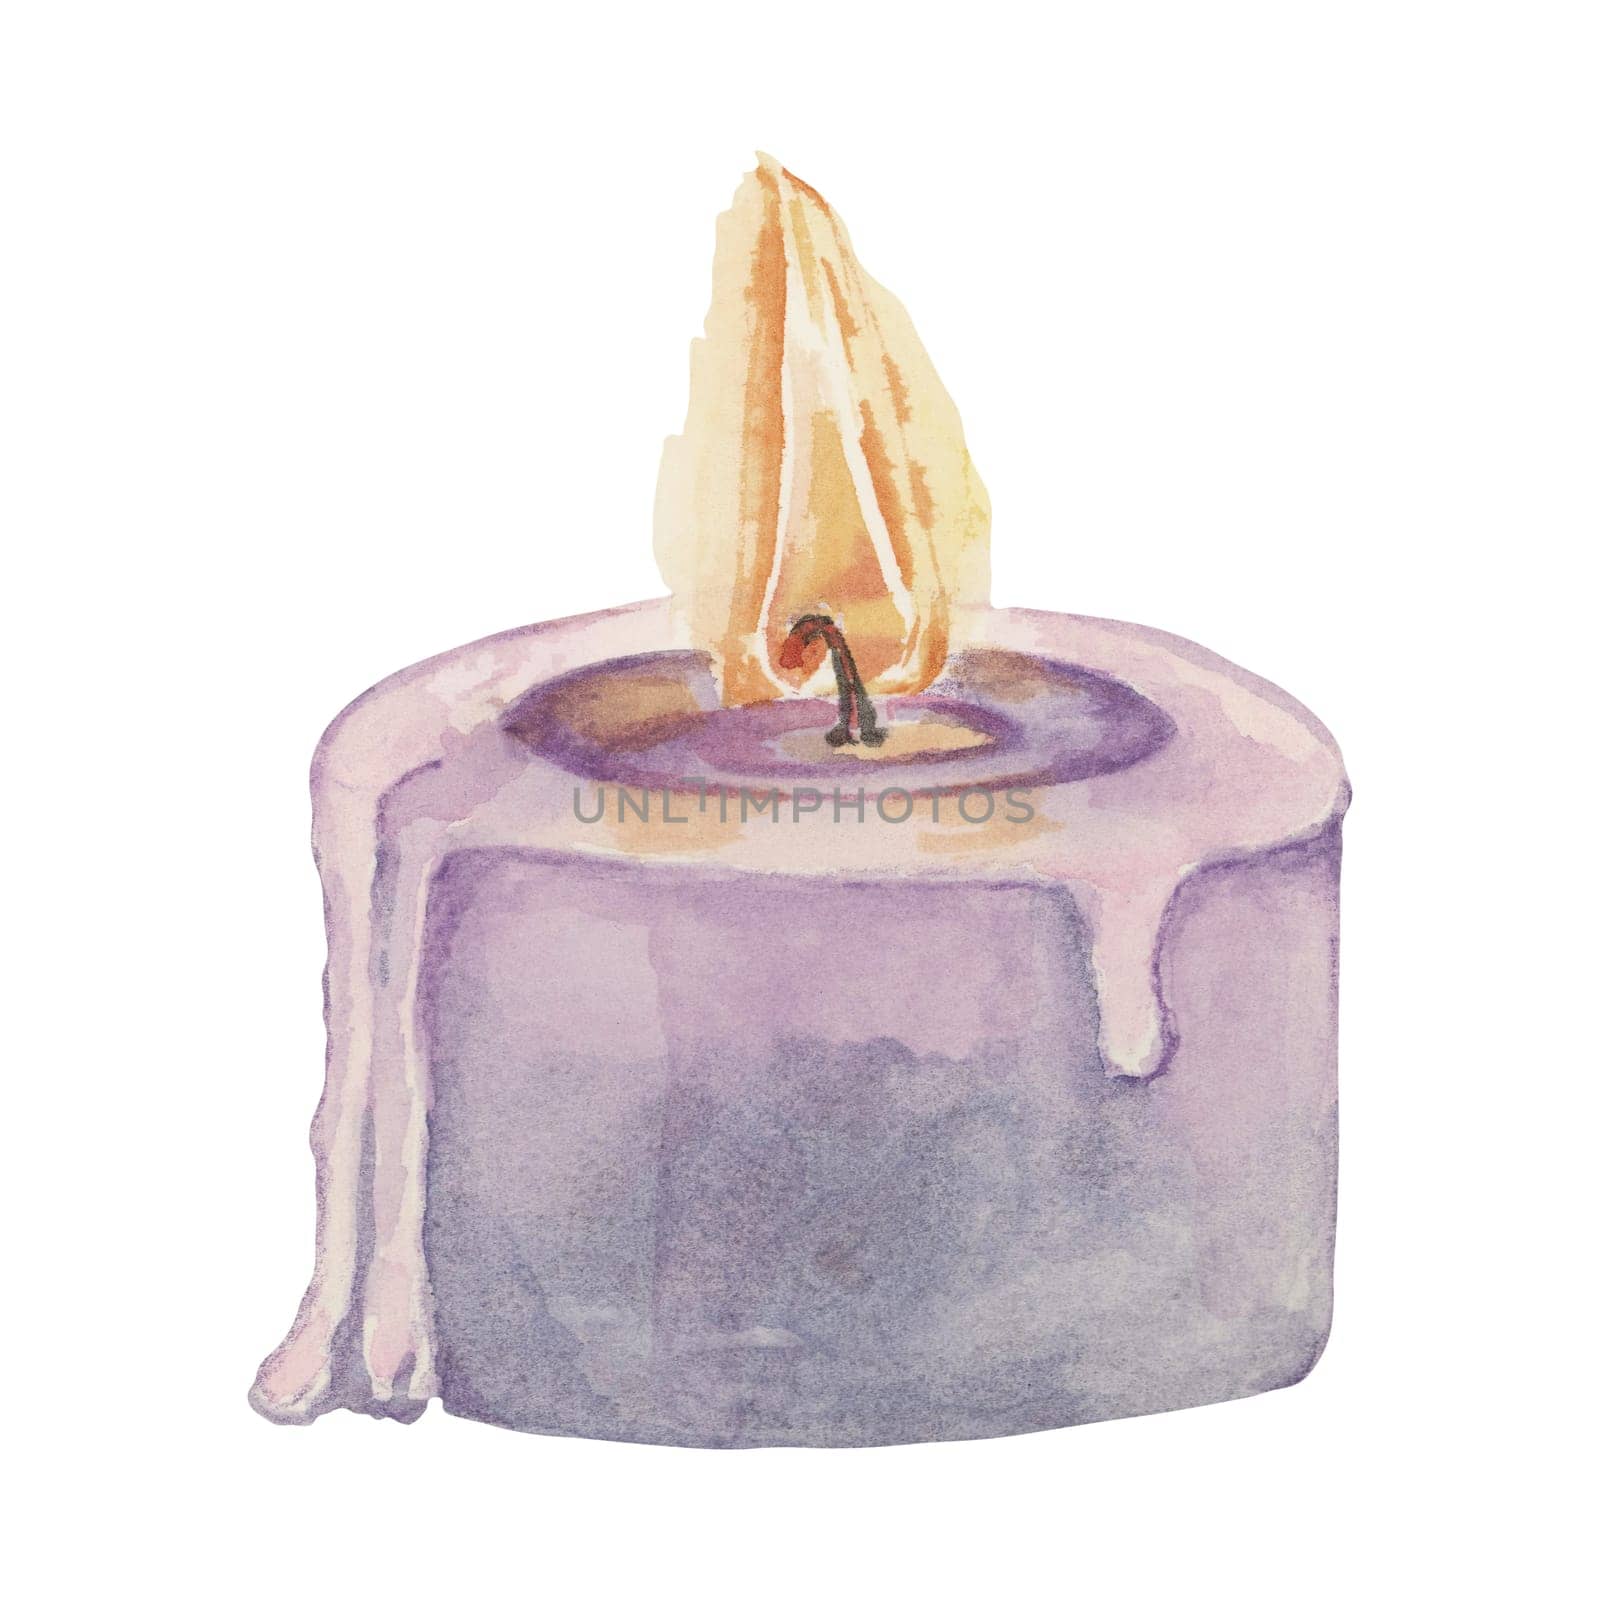 Lavender melting wax candle for home fragrance. Home spa aromatherapy watercolor illustration. Hand drawn clipart for beauty, cosmetics, wellness by Fofito